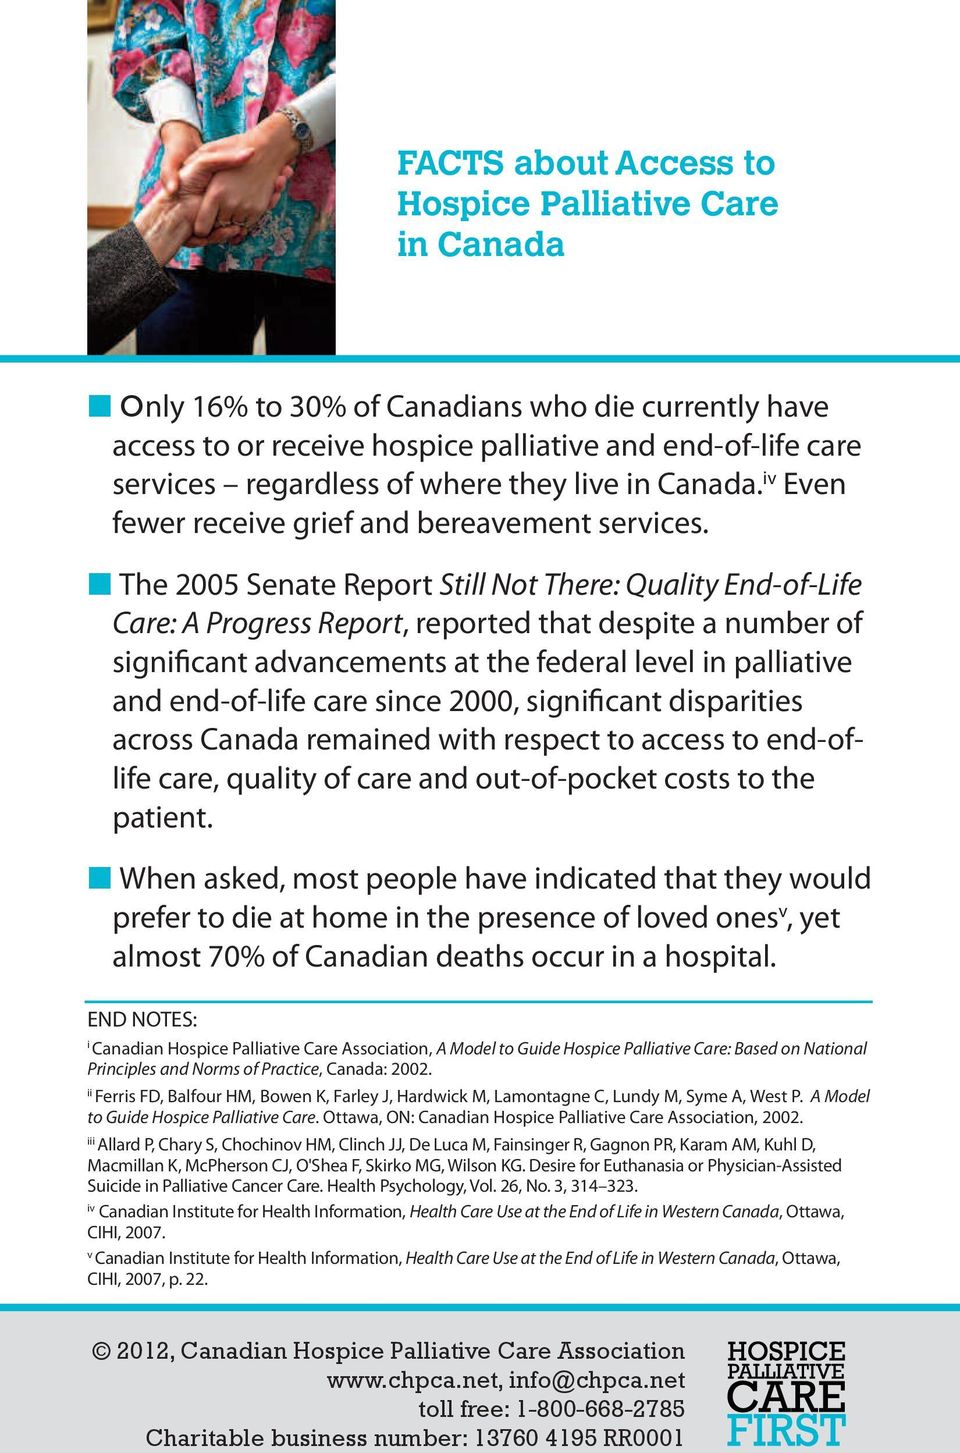 n The 2005 Senate Report Still Not There: Quality End-of-Life Care: A Progress Report, reported that despite a number of significant advancements at the federal level in palliative and end-of-life